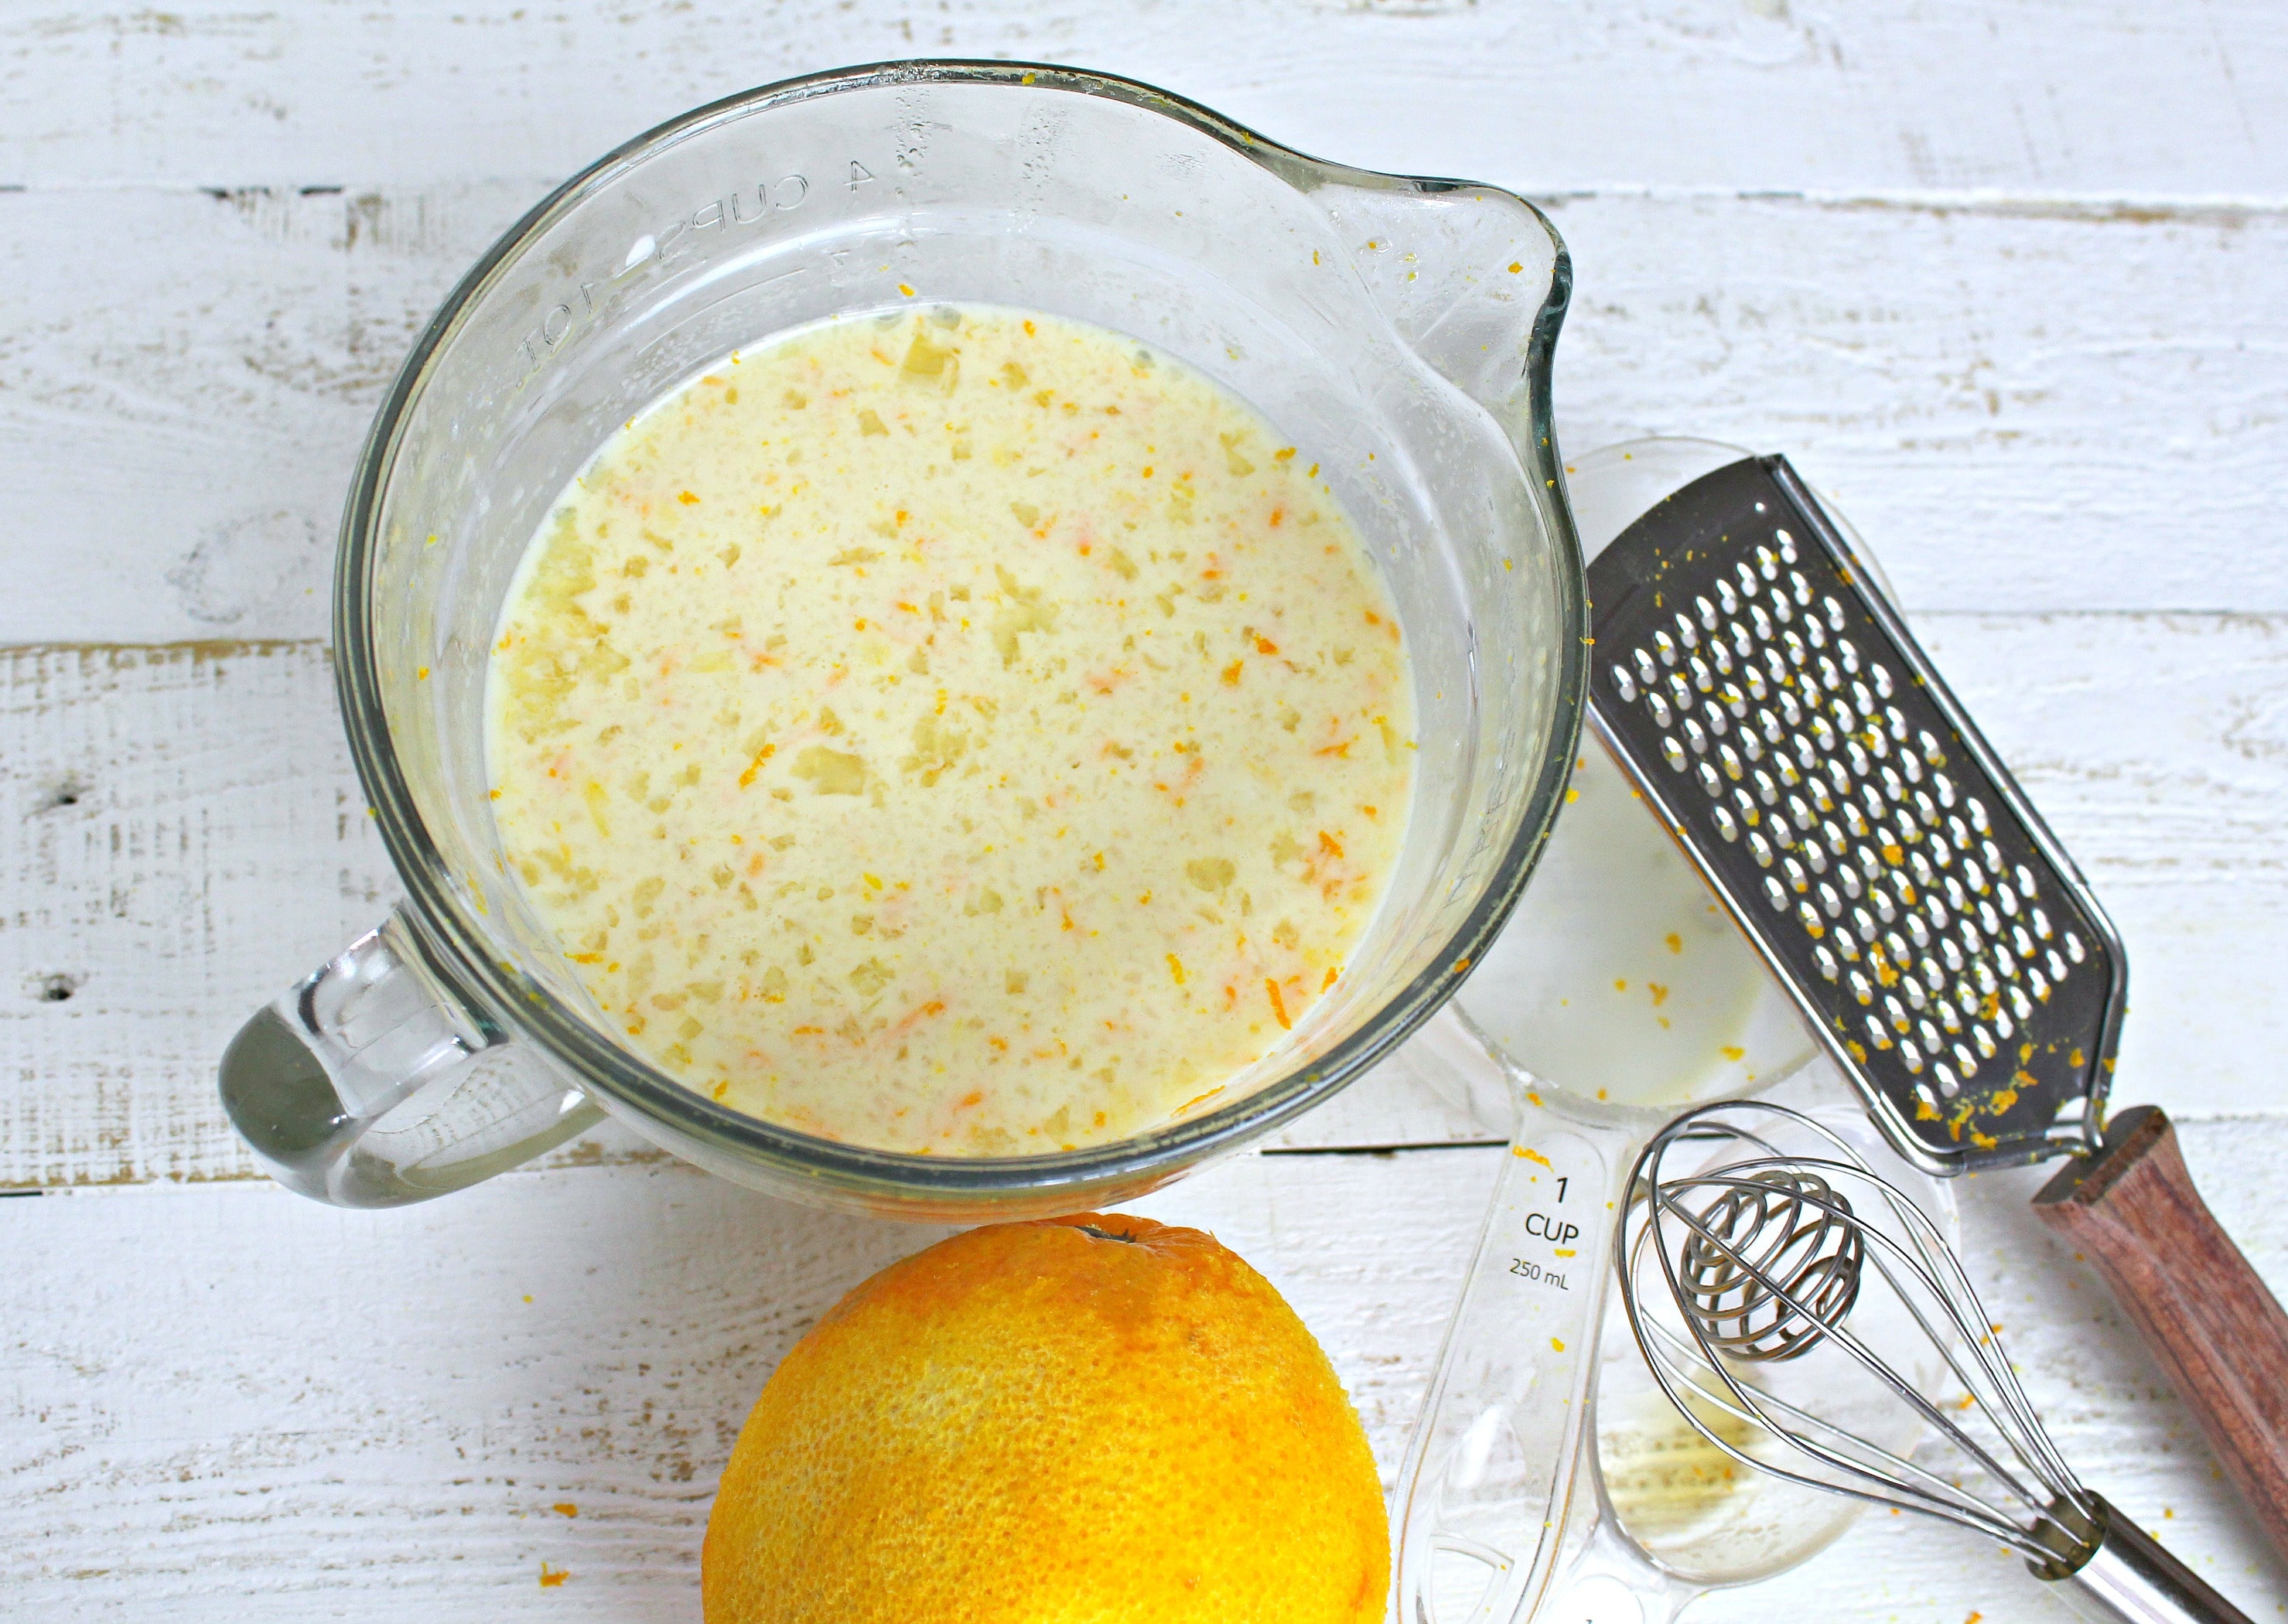 In a medium-sized bowl, whisk together milk, maple syrup, eggs, applesauce, vanilla, and the zest of the orange.